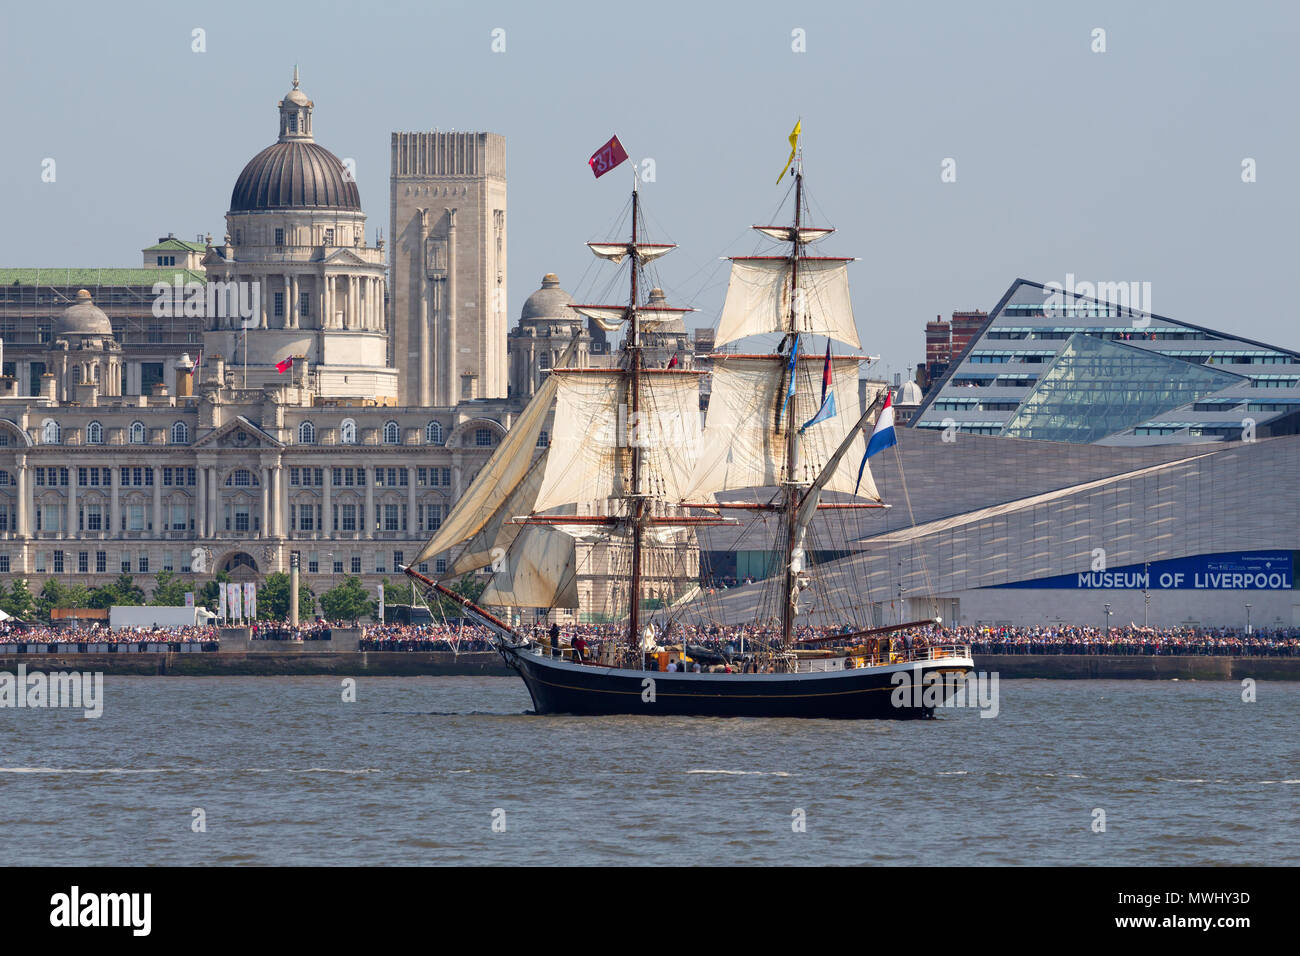 The Tall ship Morgenster on the River Mersey during the Three Festivals Tall Ships Regatta in Liverpool 2018. Stock Photo